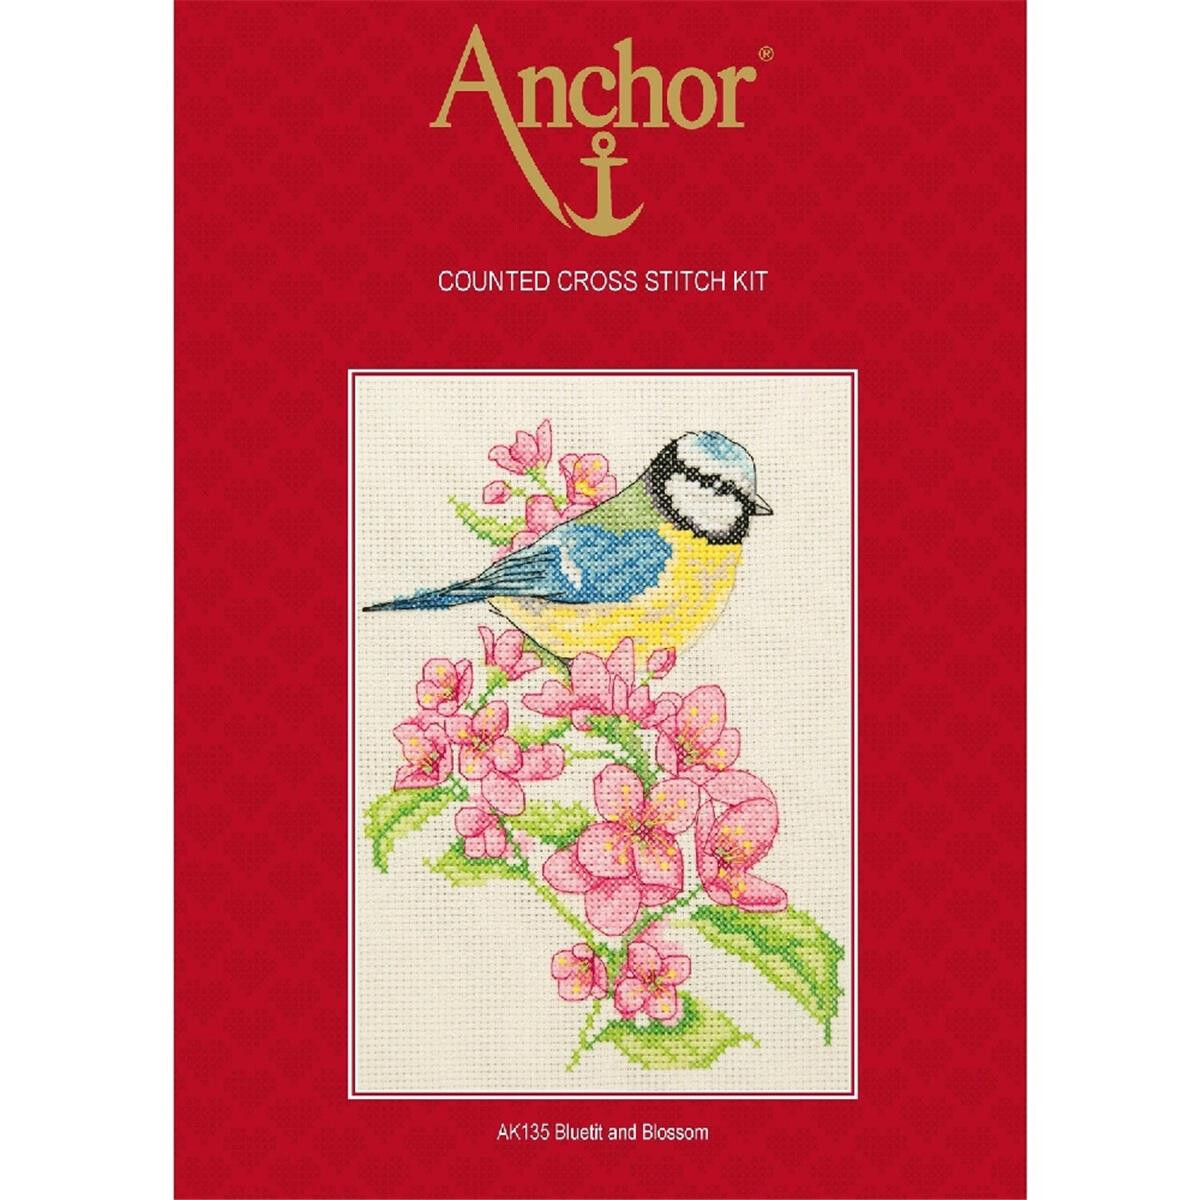 Anchor counted Cross Stitch kit "Bluetit and...